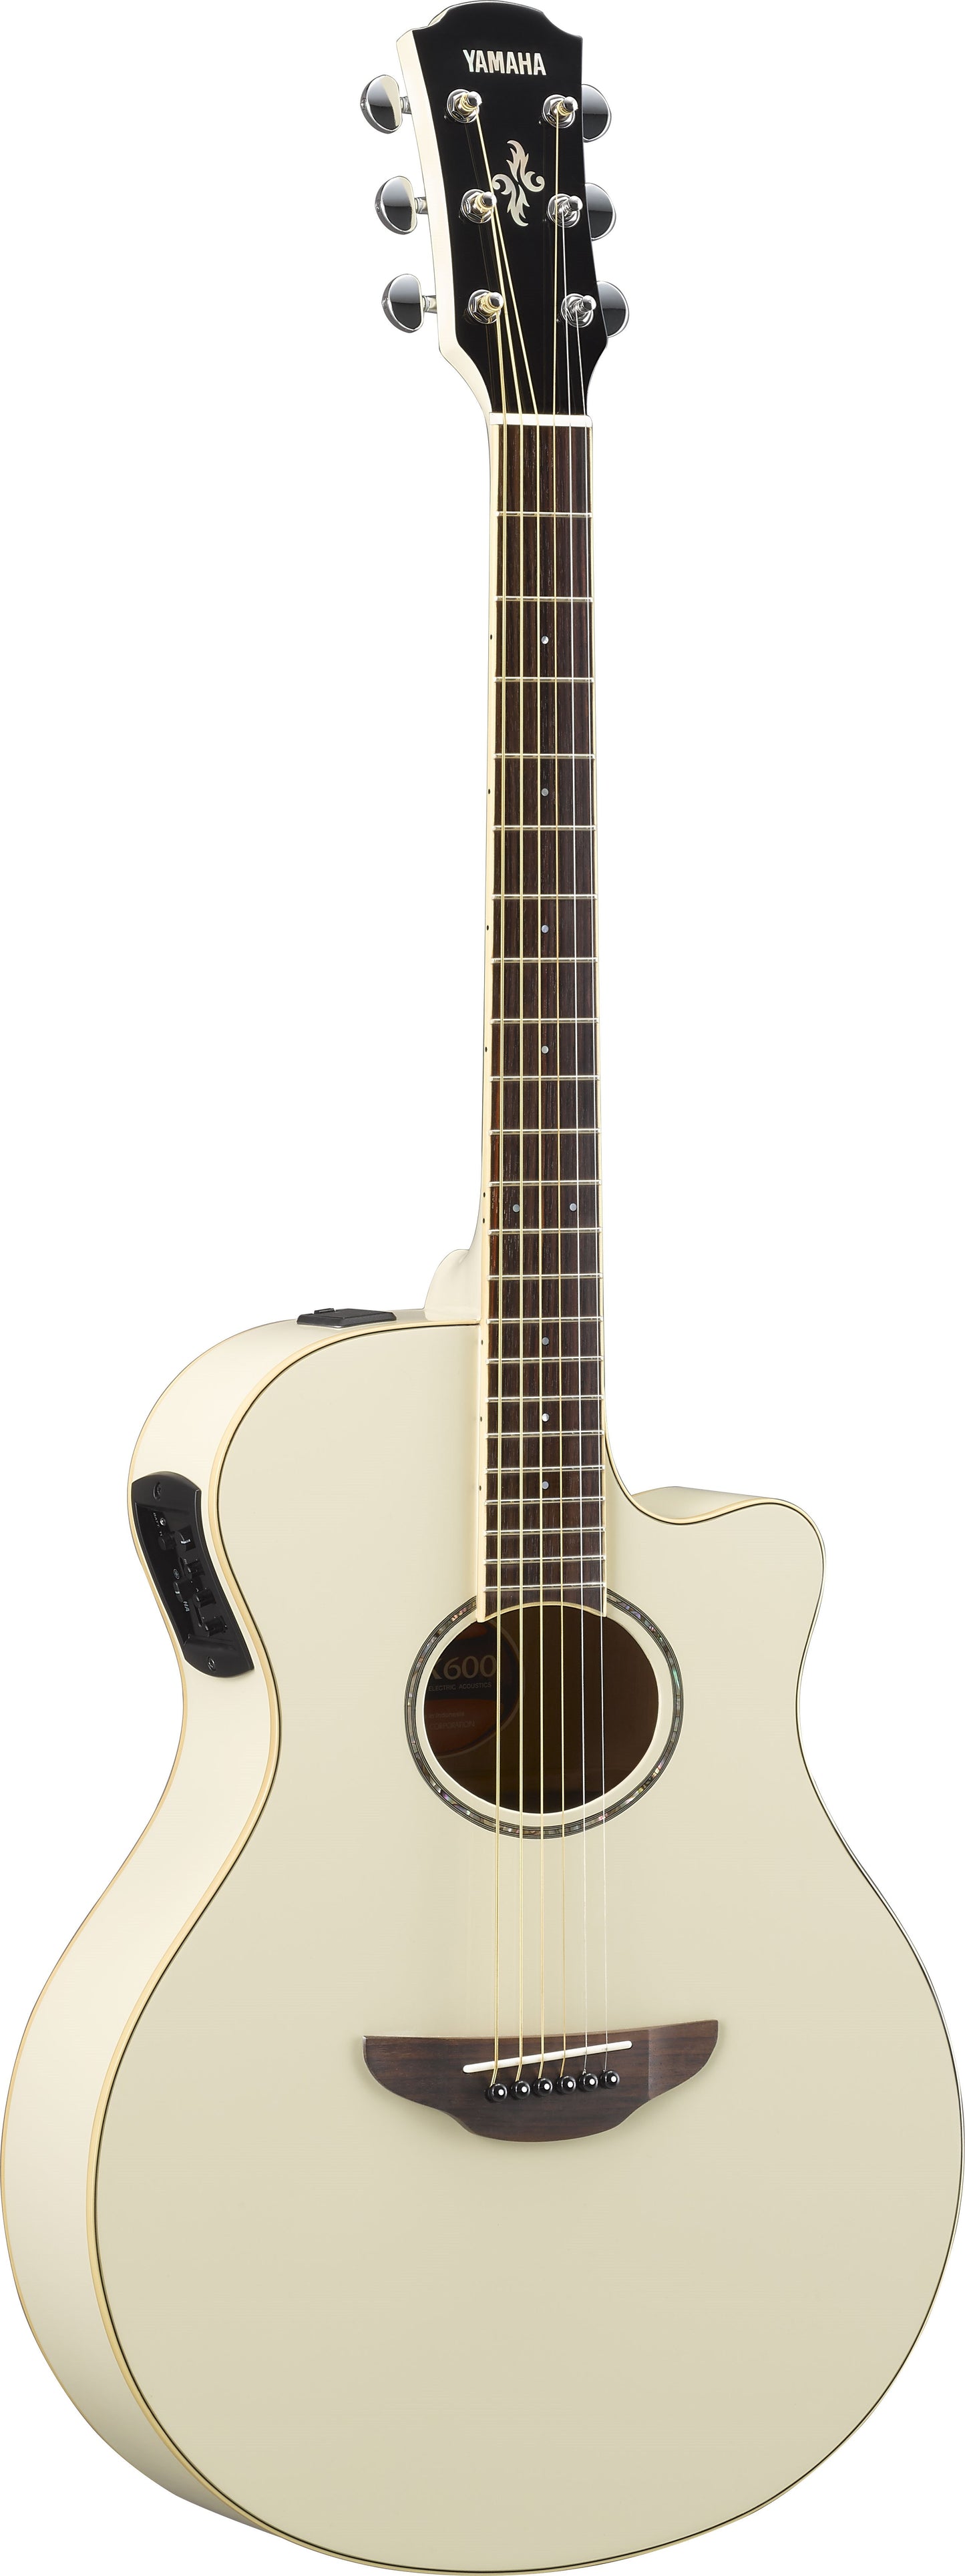 Yamaha APX600 Electric Acoustic Guitar